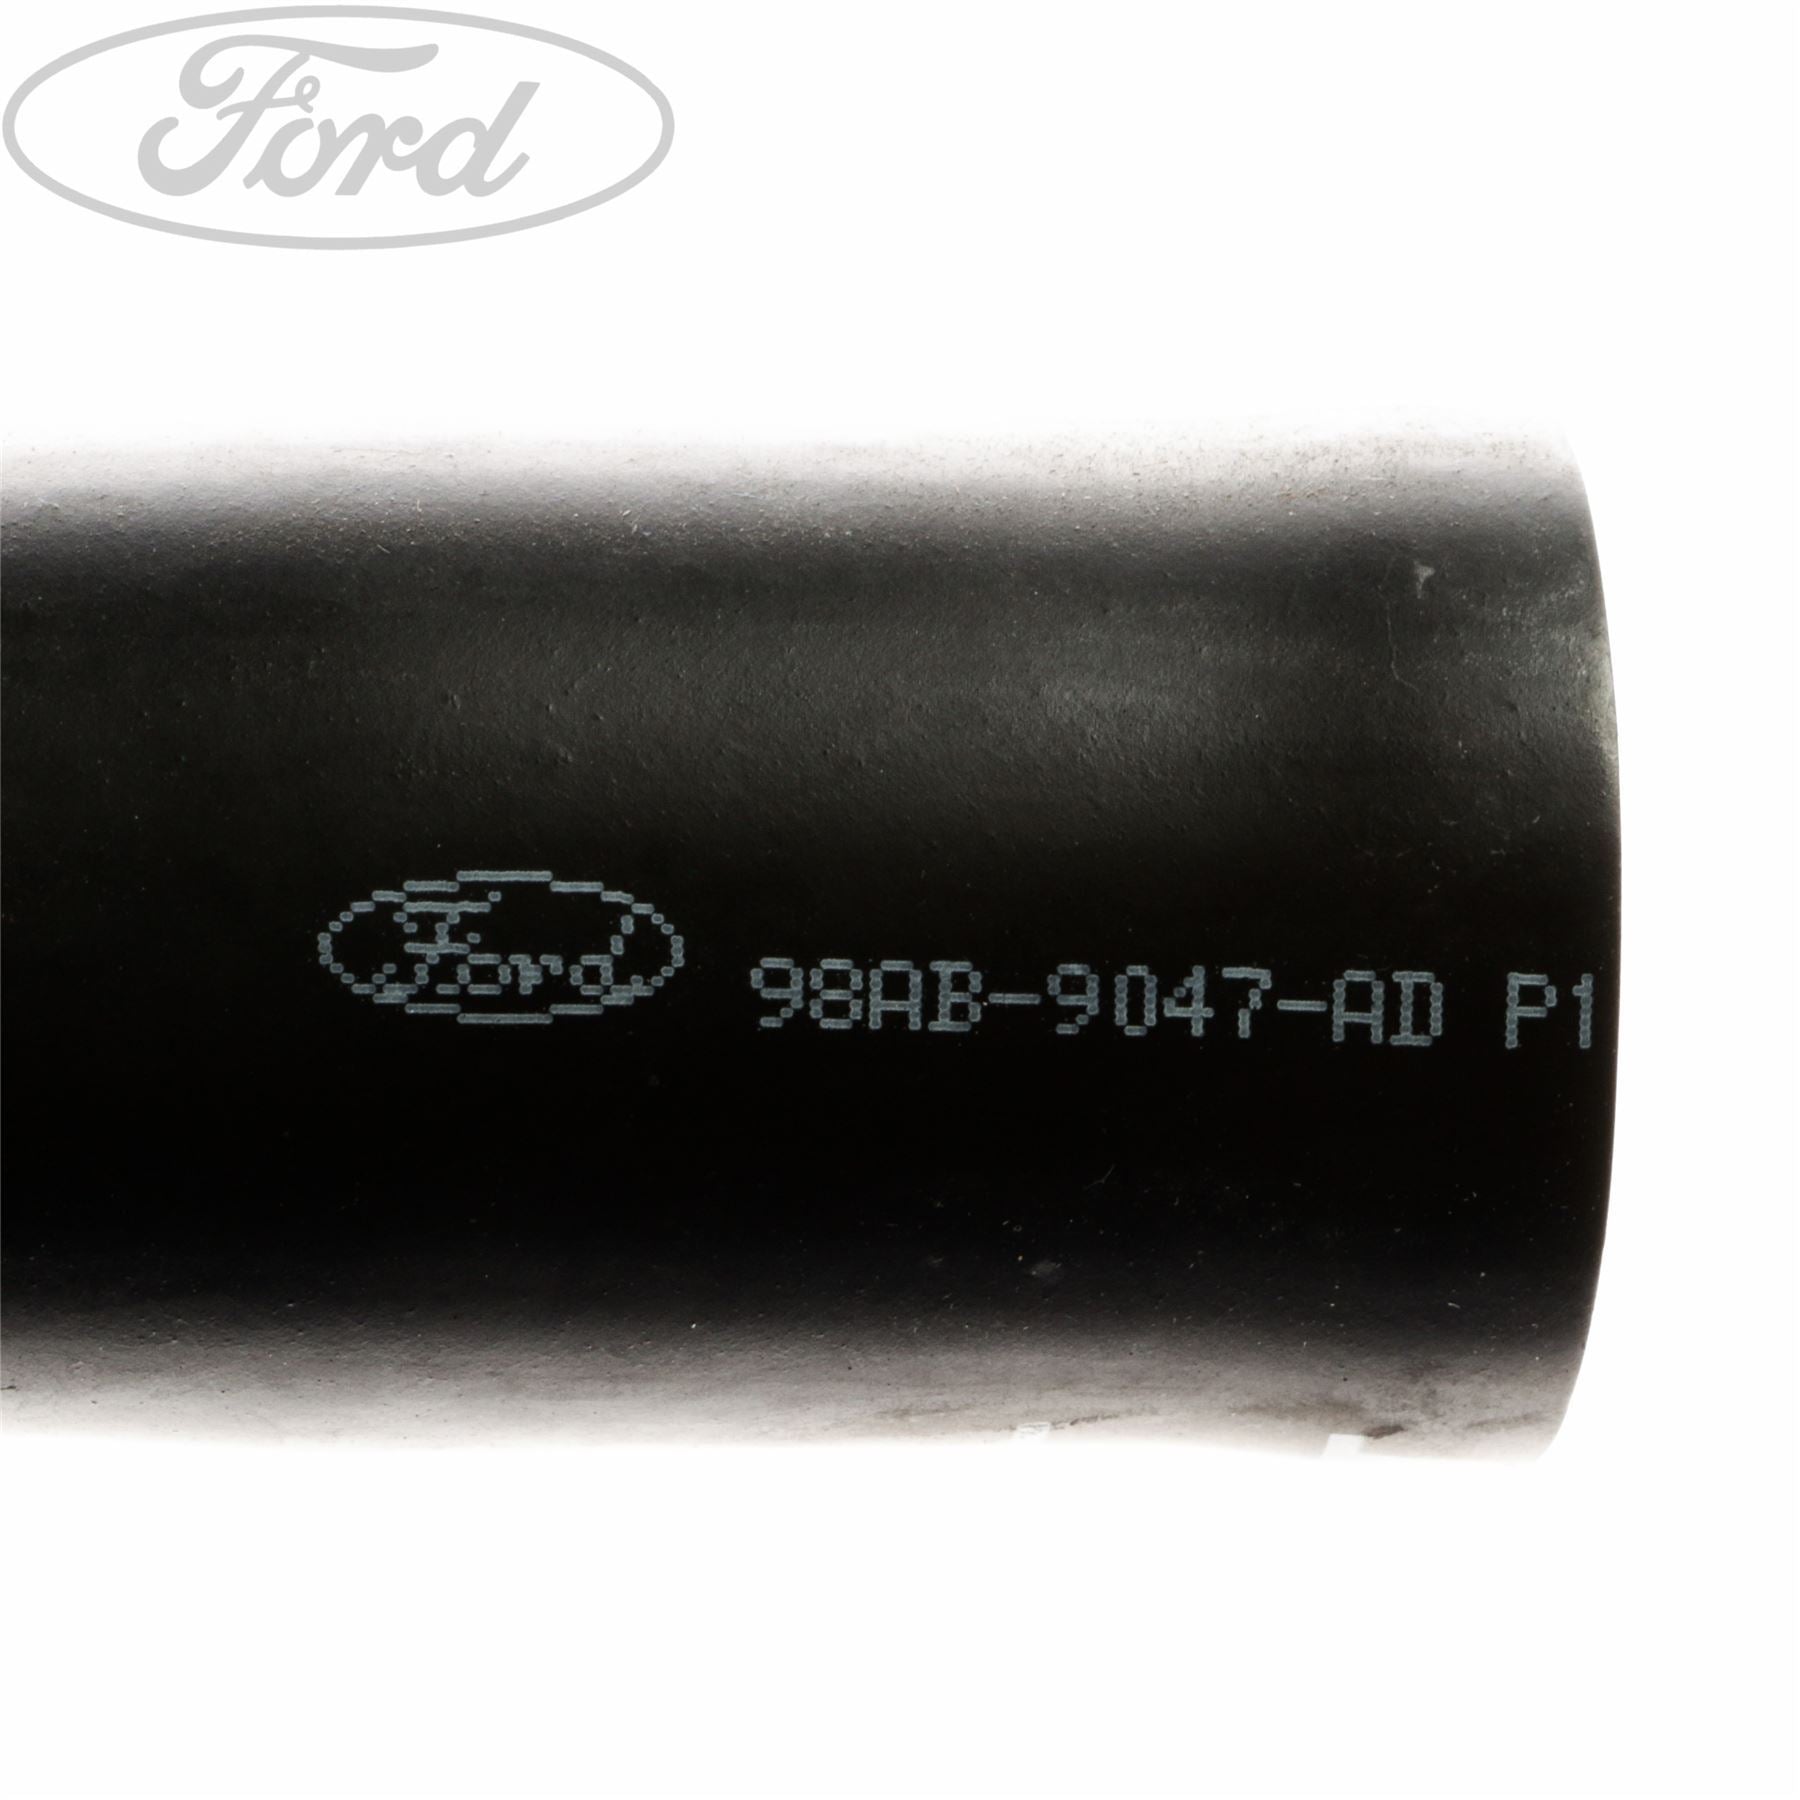 Used 2013 FORD FOCUS FUEL FILLER NECK - Yancey Auto Parts